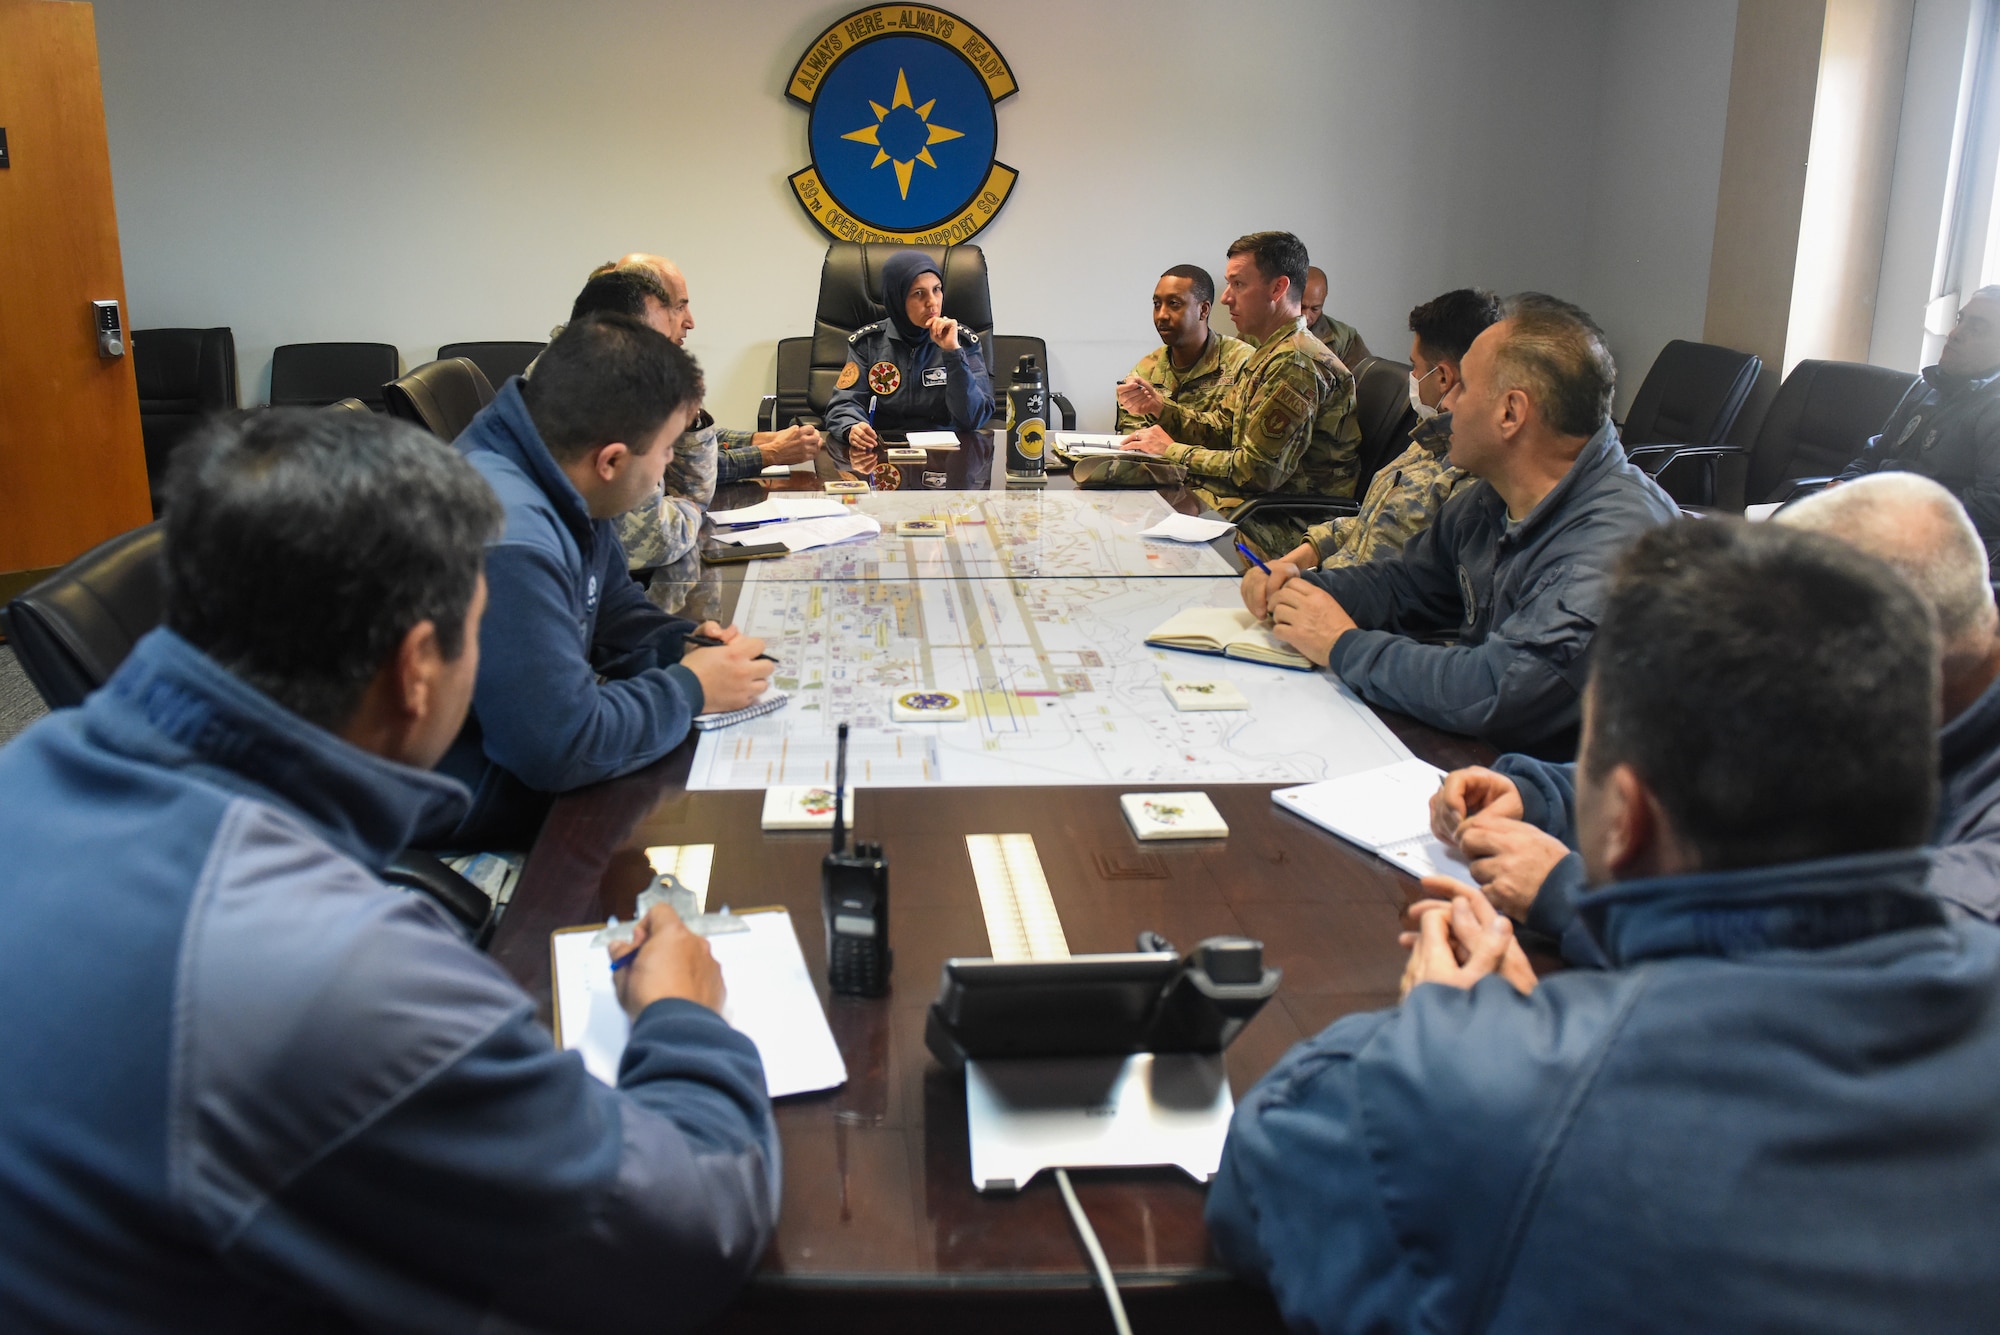 Turkish and American military members in an office meeting